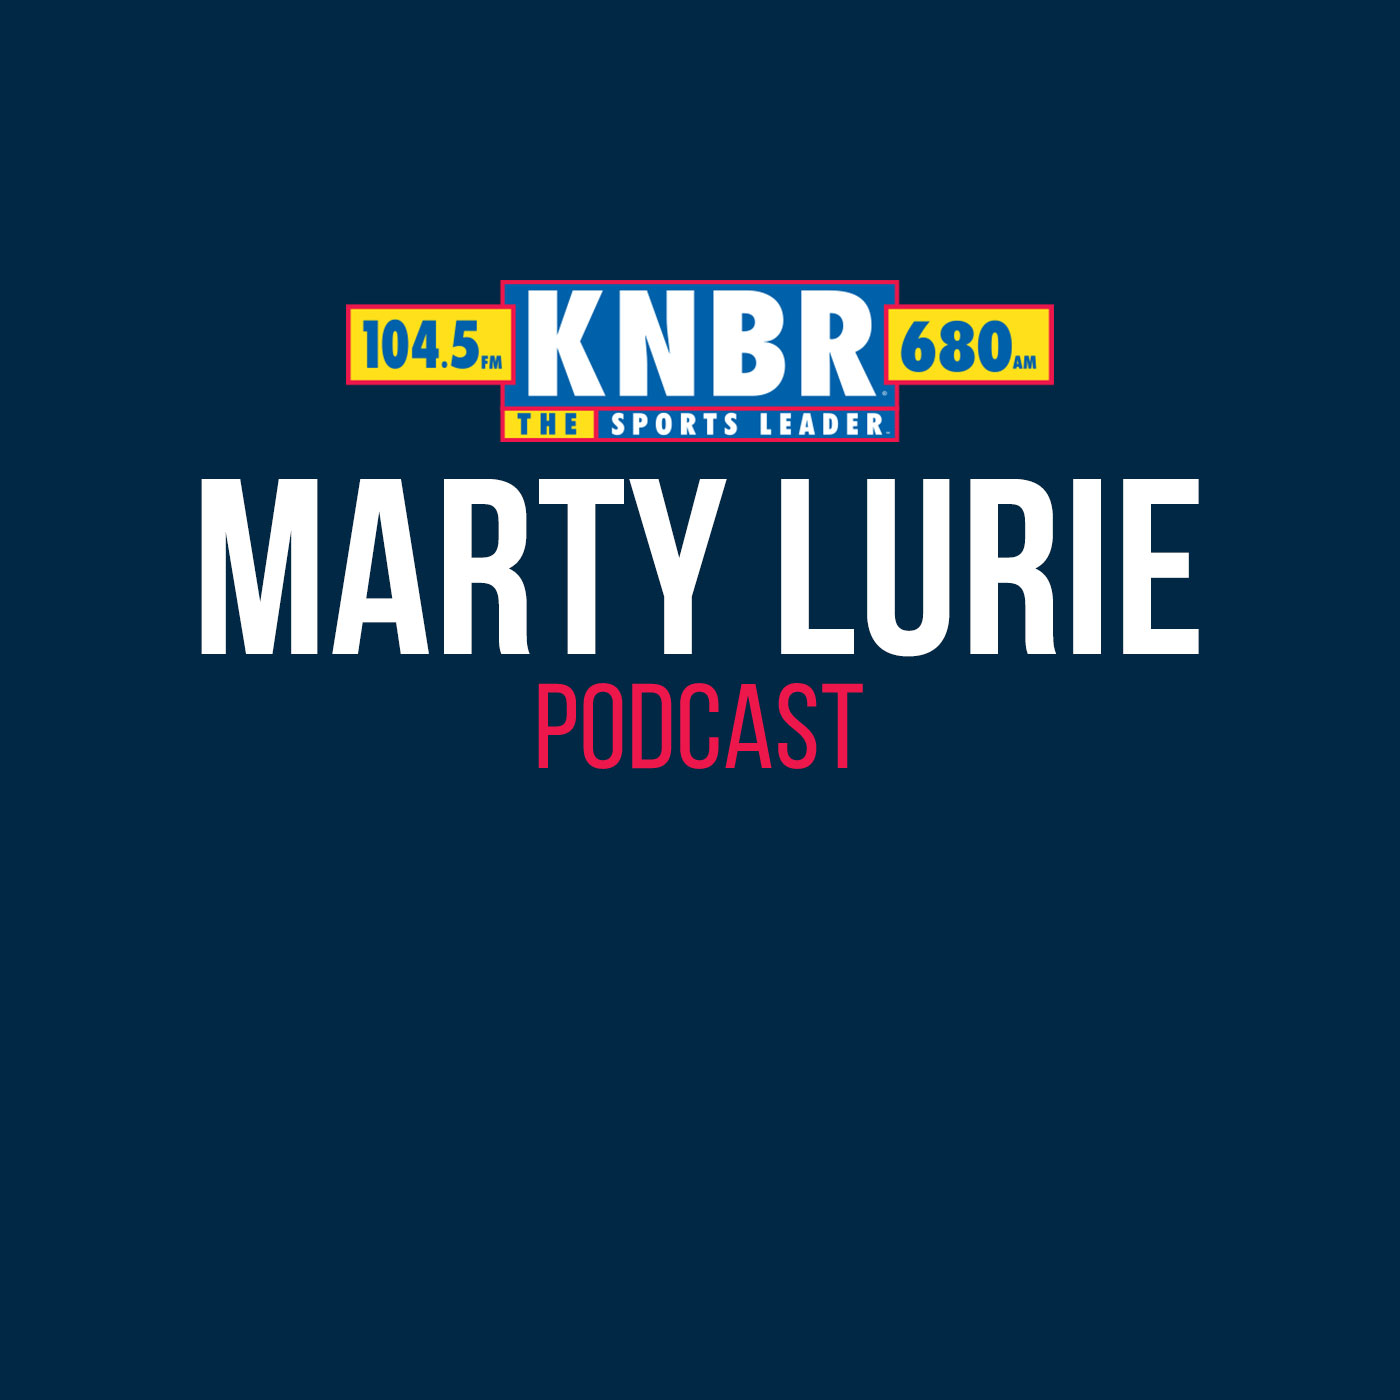 5-1 Keith Law joins Talkin' baseball with Marty Lurie to talk about the upcoming MLB draft and his newest book:  The Inside Game: Bad Calls, Strange Moves, and What Baseball Behavior Teaches Us About Ourselves